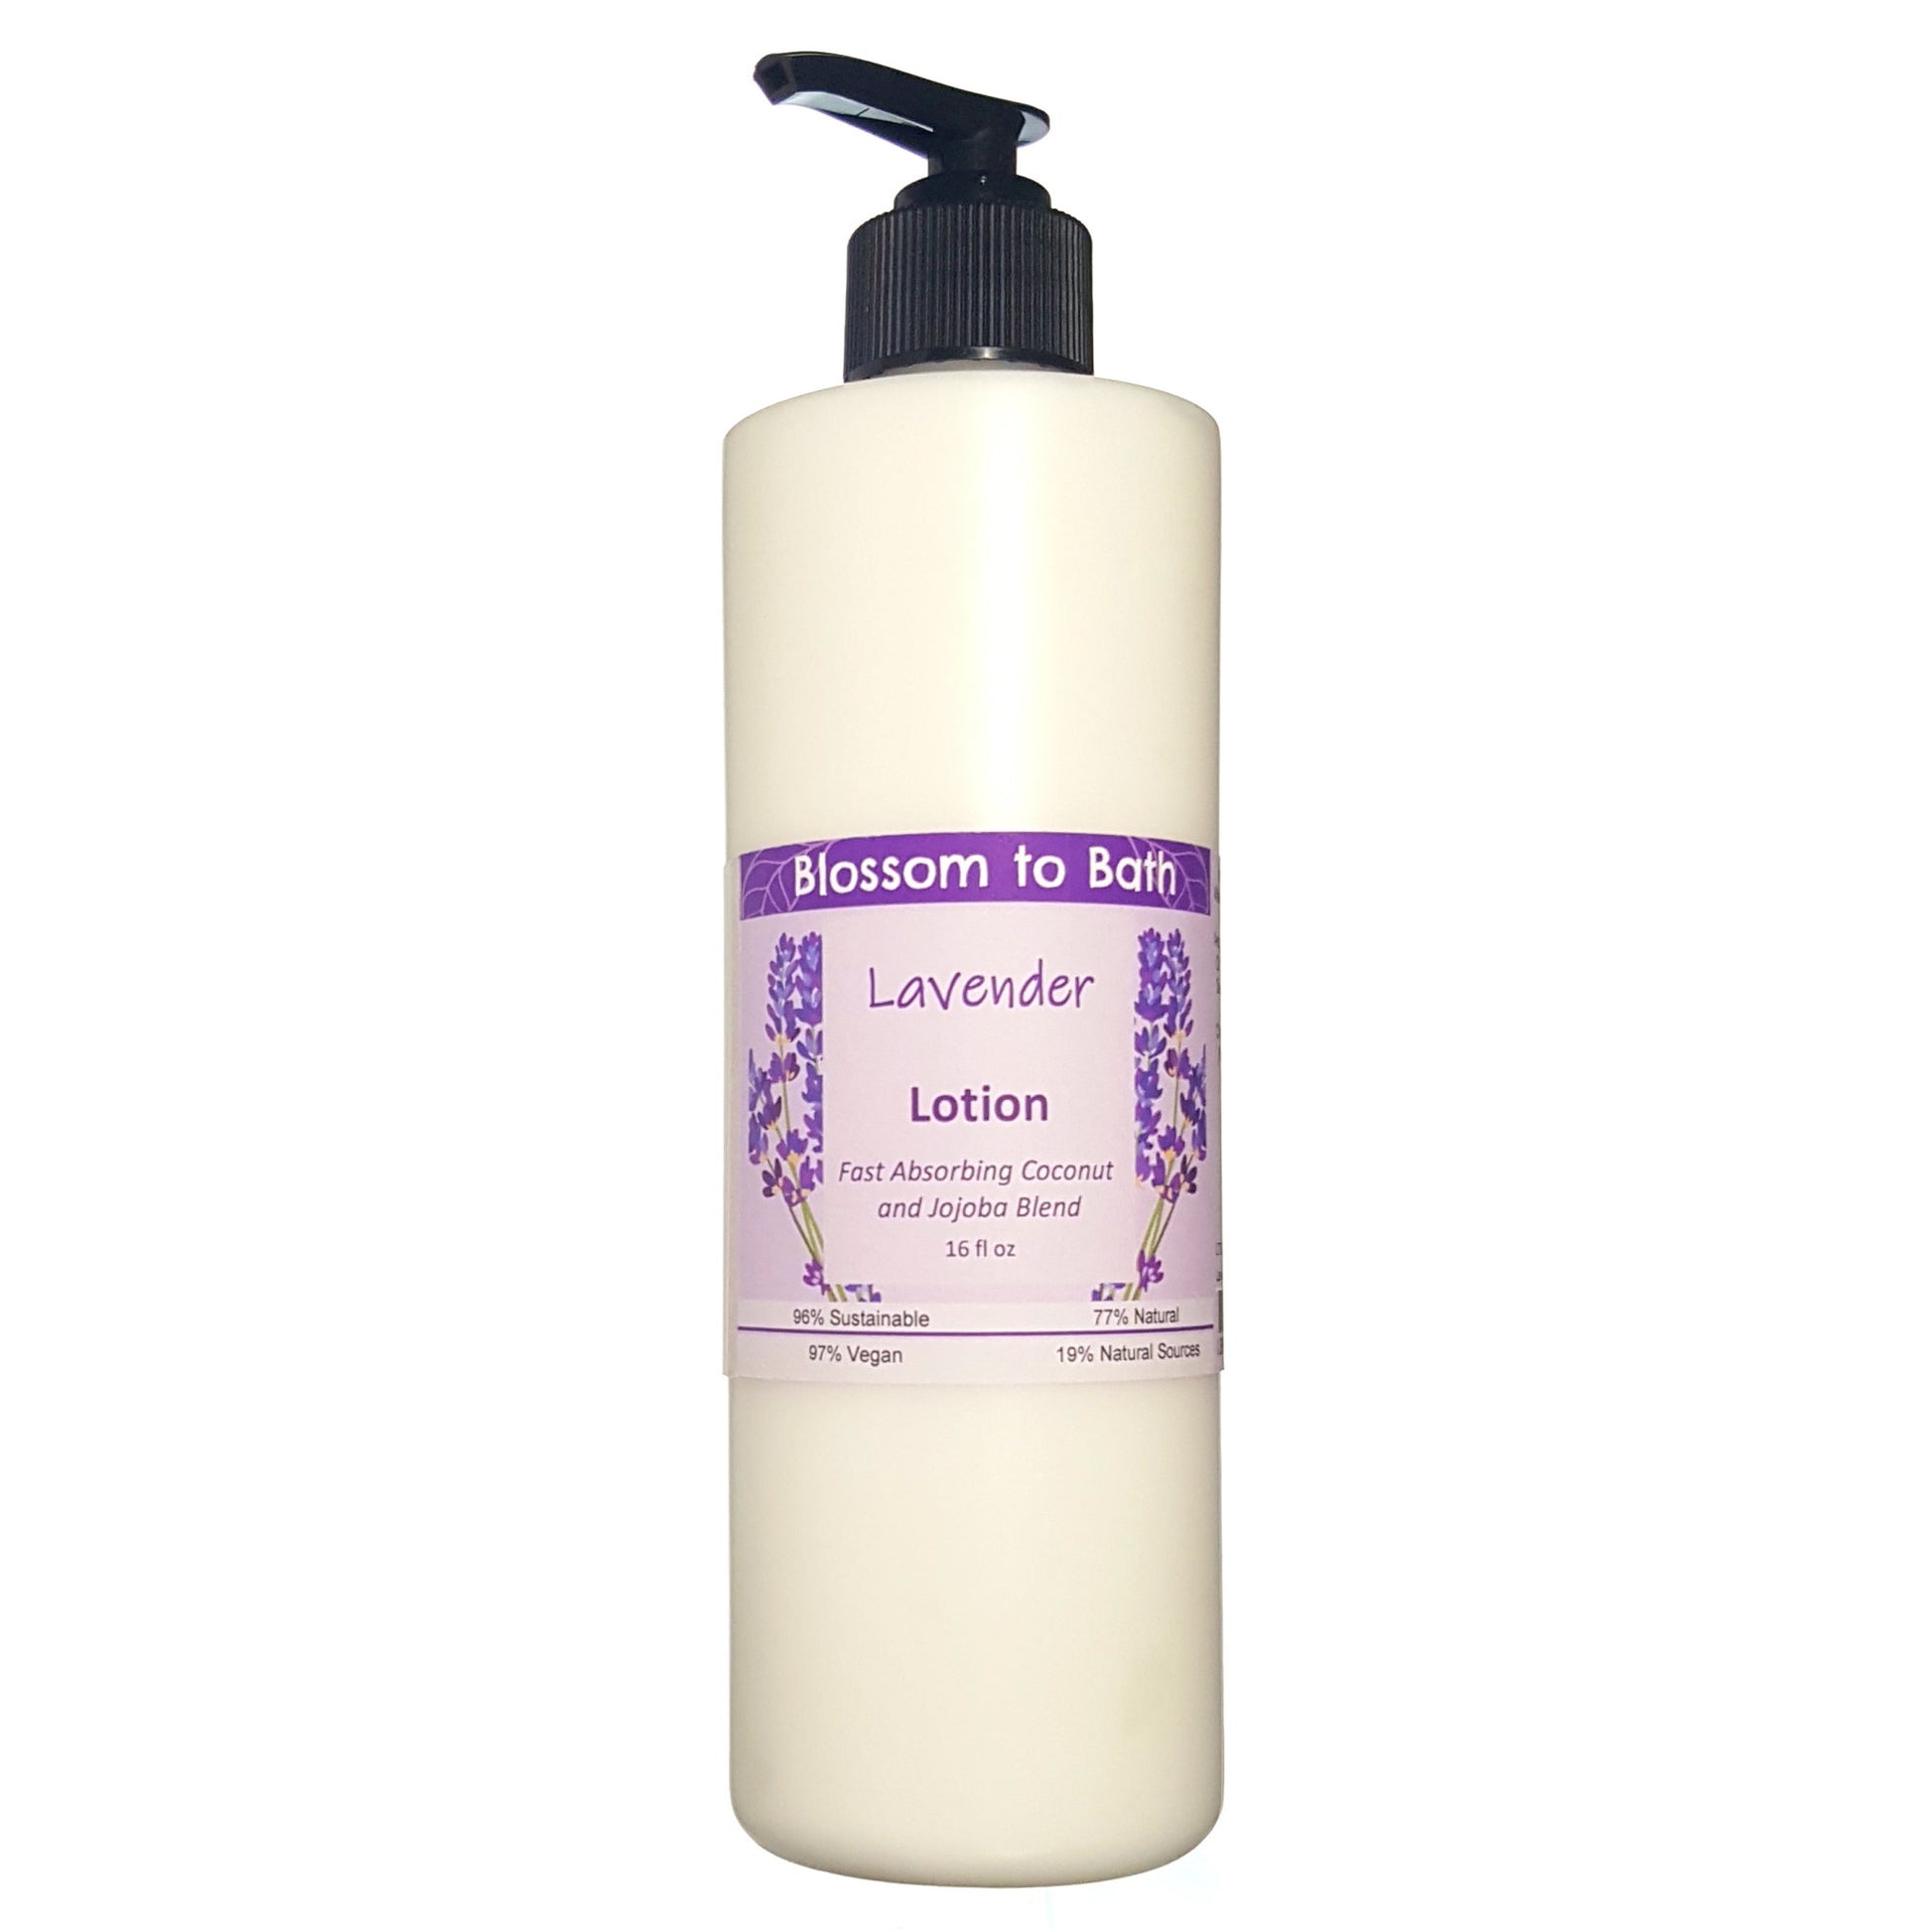 Buy Blossom to Bath Lavender Lotion from Flowersong Soap Studio.  Daily moisture luxury that soaks in quickly made with organic oils and butters that soften and smooth the skin  Classic lavender scent that is relaxing and comforting.